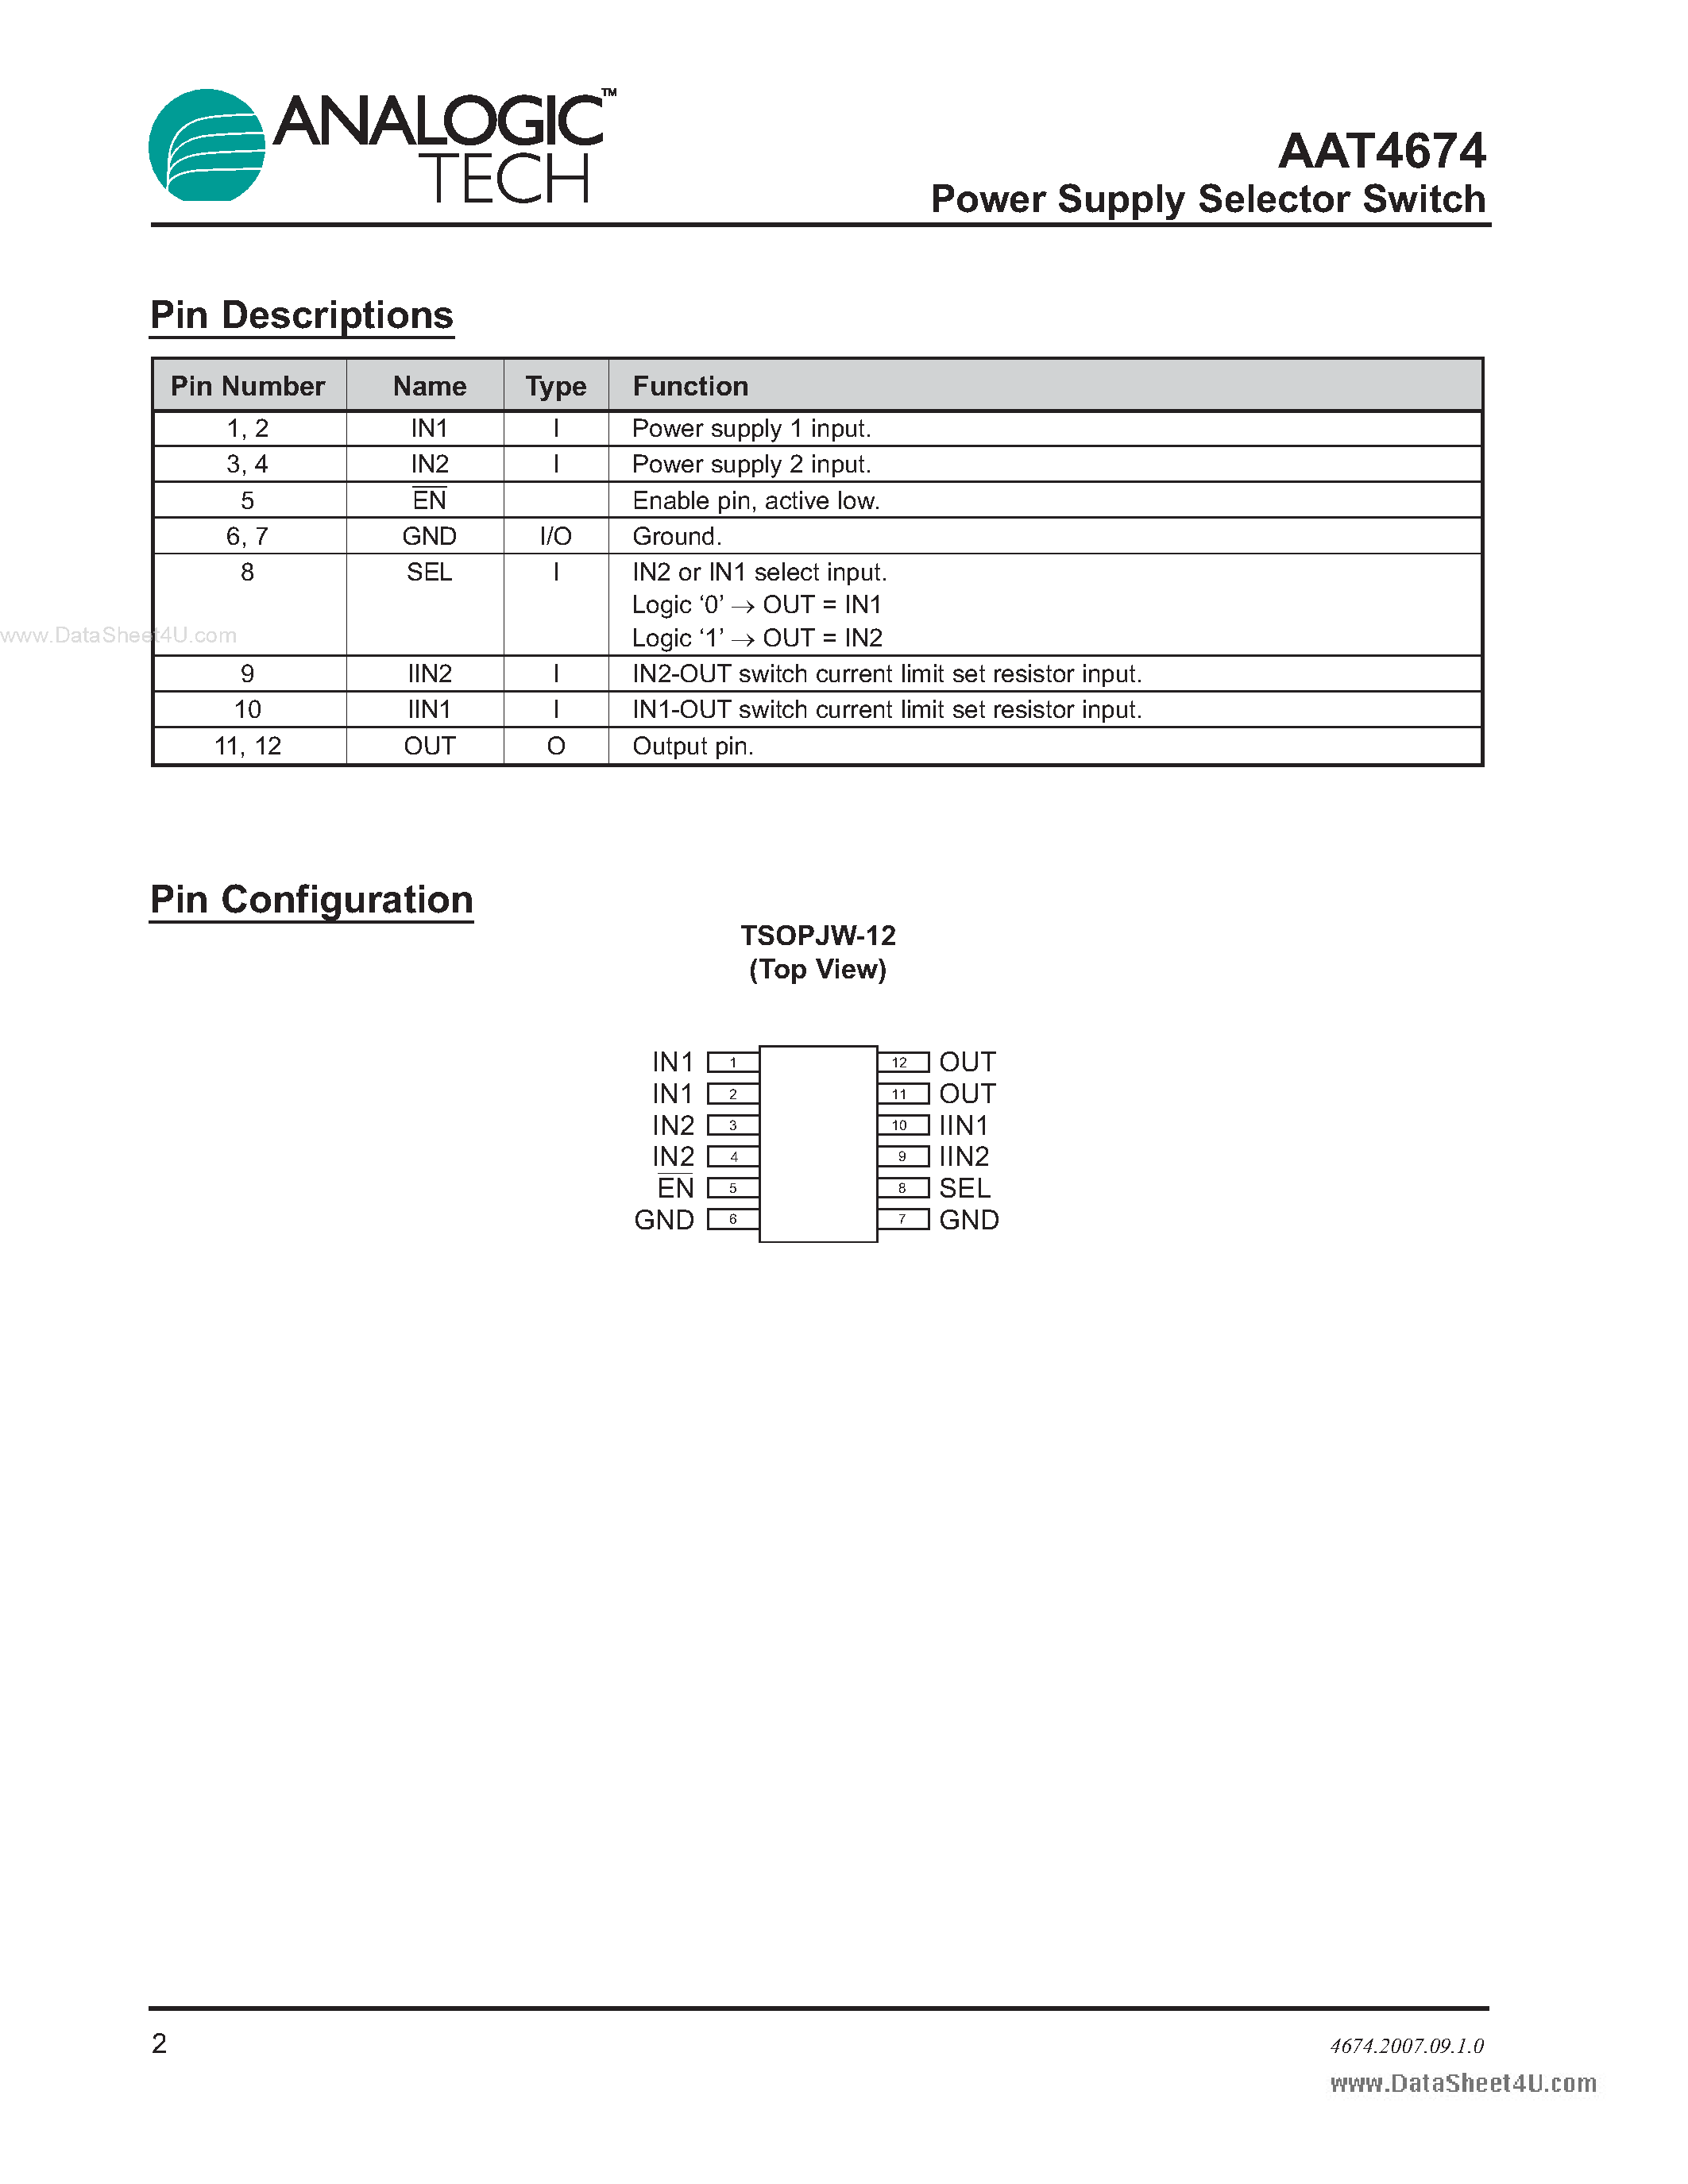 Datasheet AAT4674 - Power Supply Selector Switch page 2